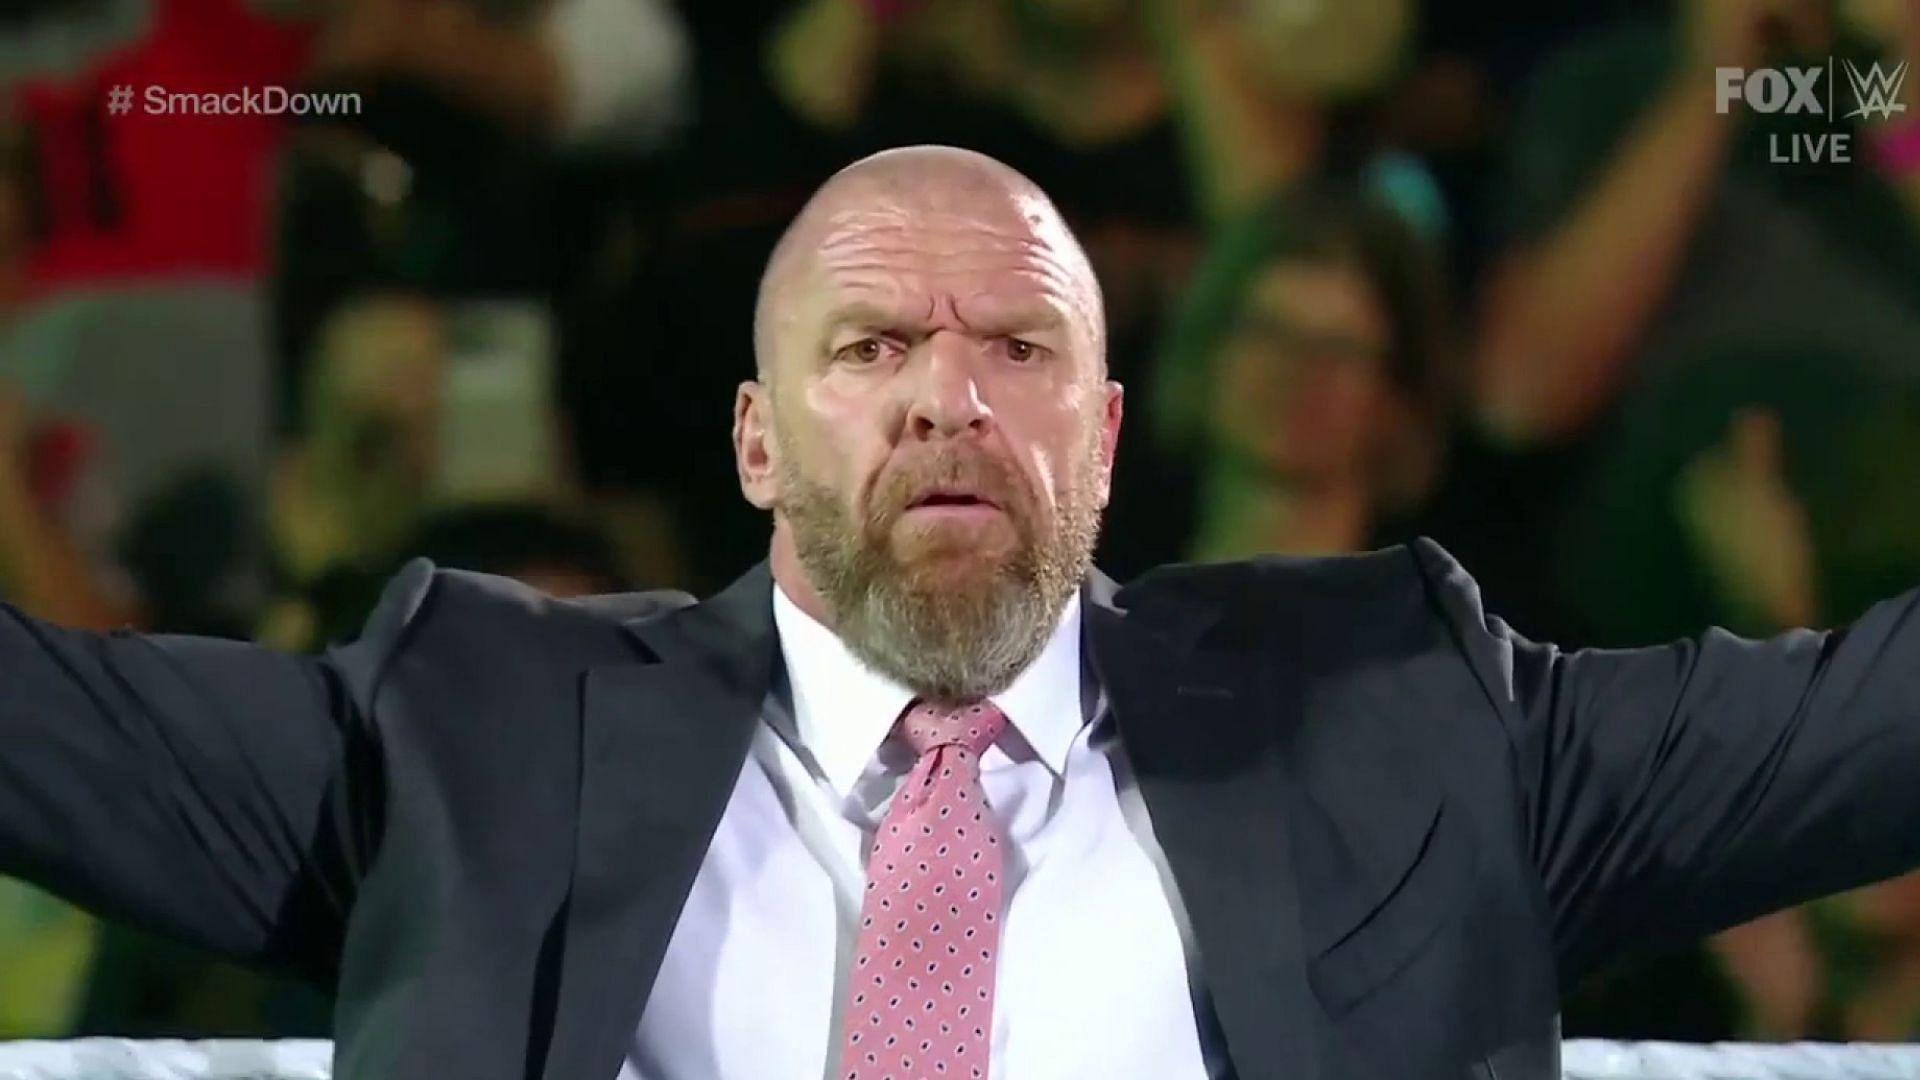 WWE Chief Content Officer Triple H posing in the ring on an episode of SmackDown